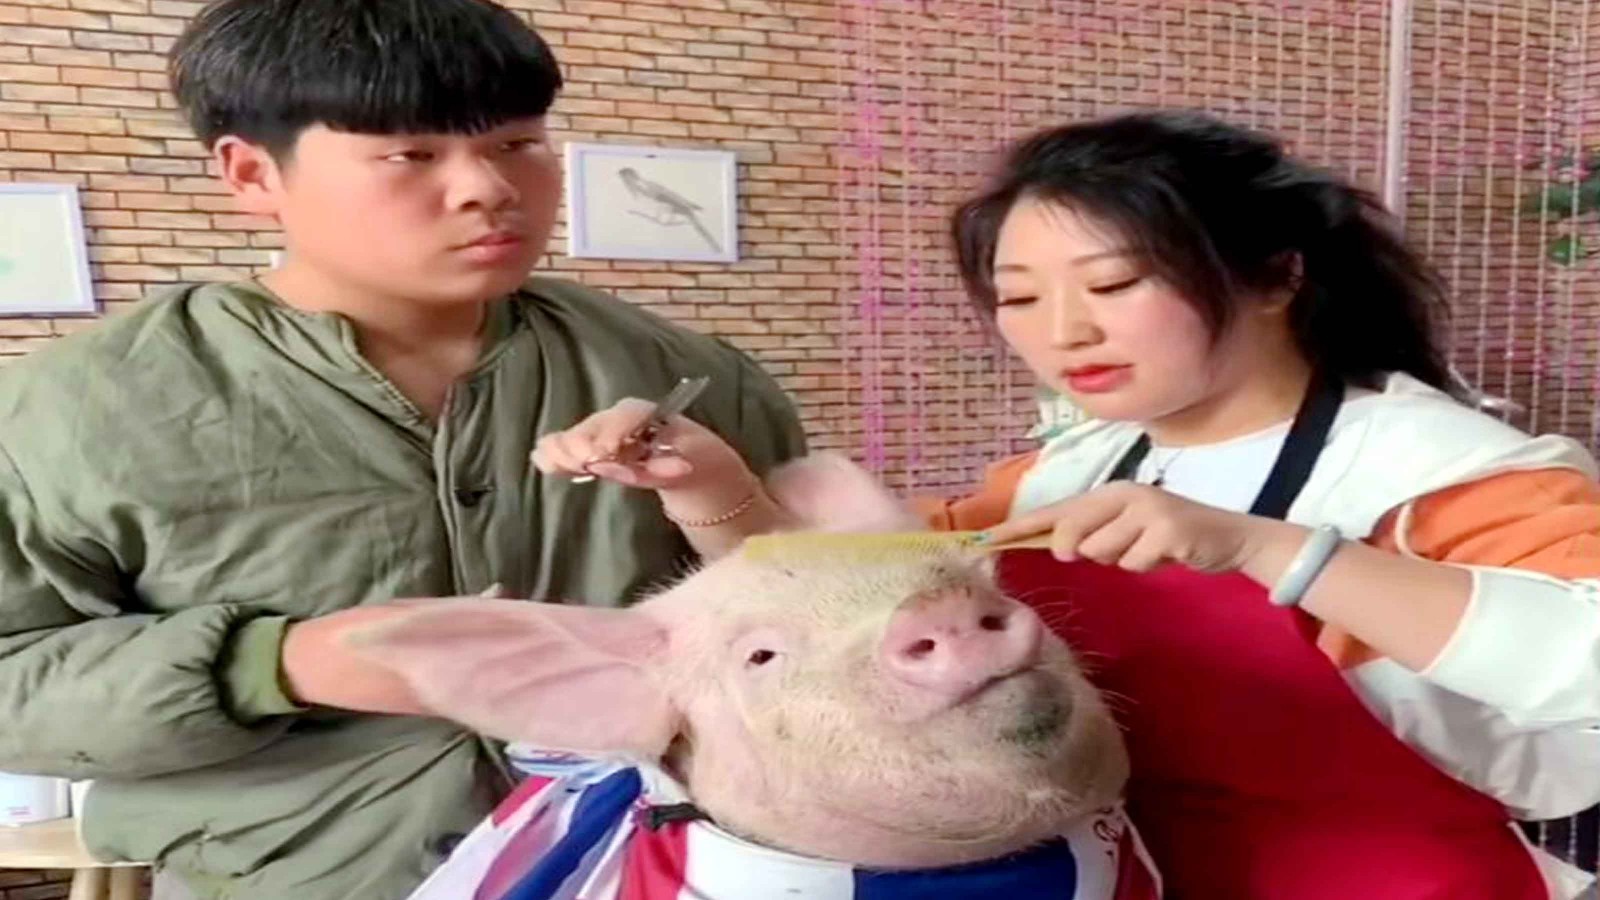 After 90 kids ride pig video network popular, thanks for pigs to take it to beauty.